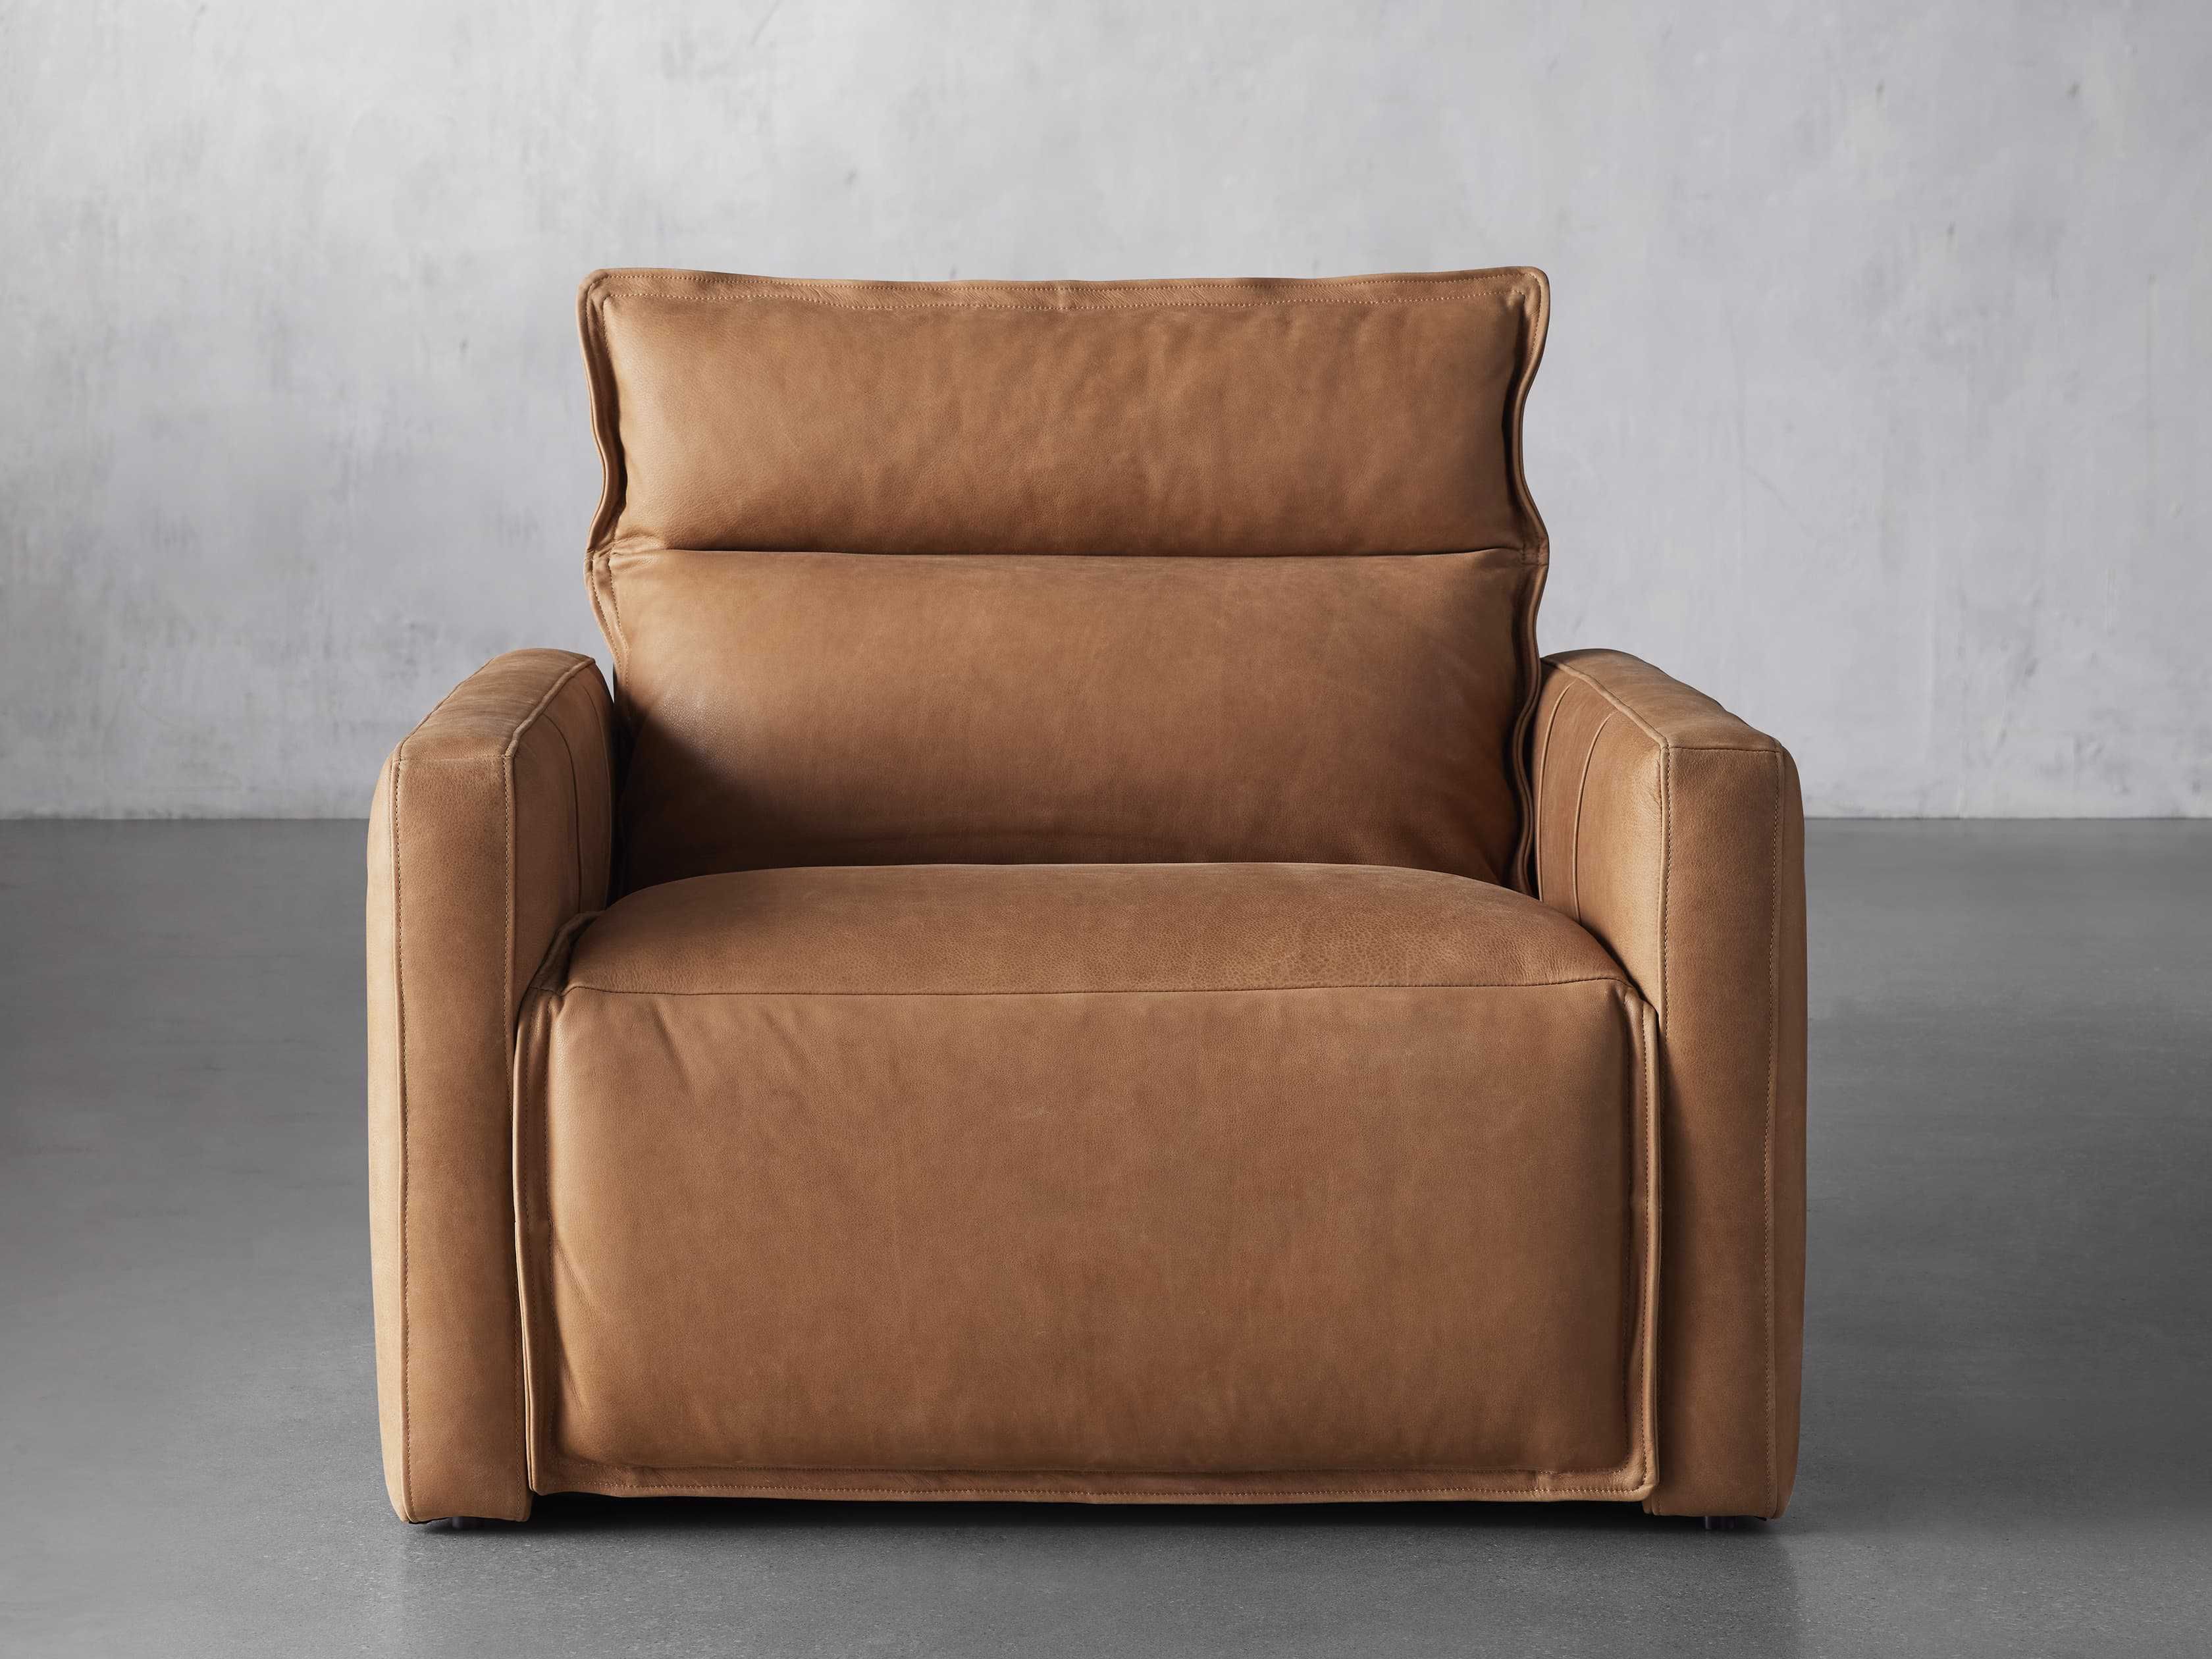 Rowland Leather High-Back Motion Recliner | Arhaus